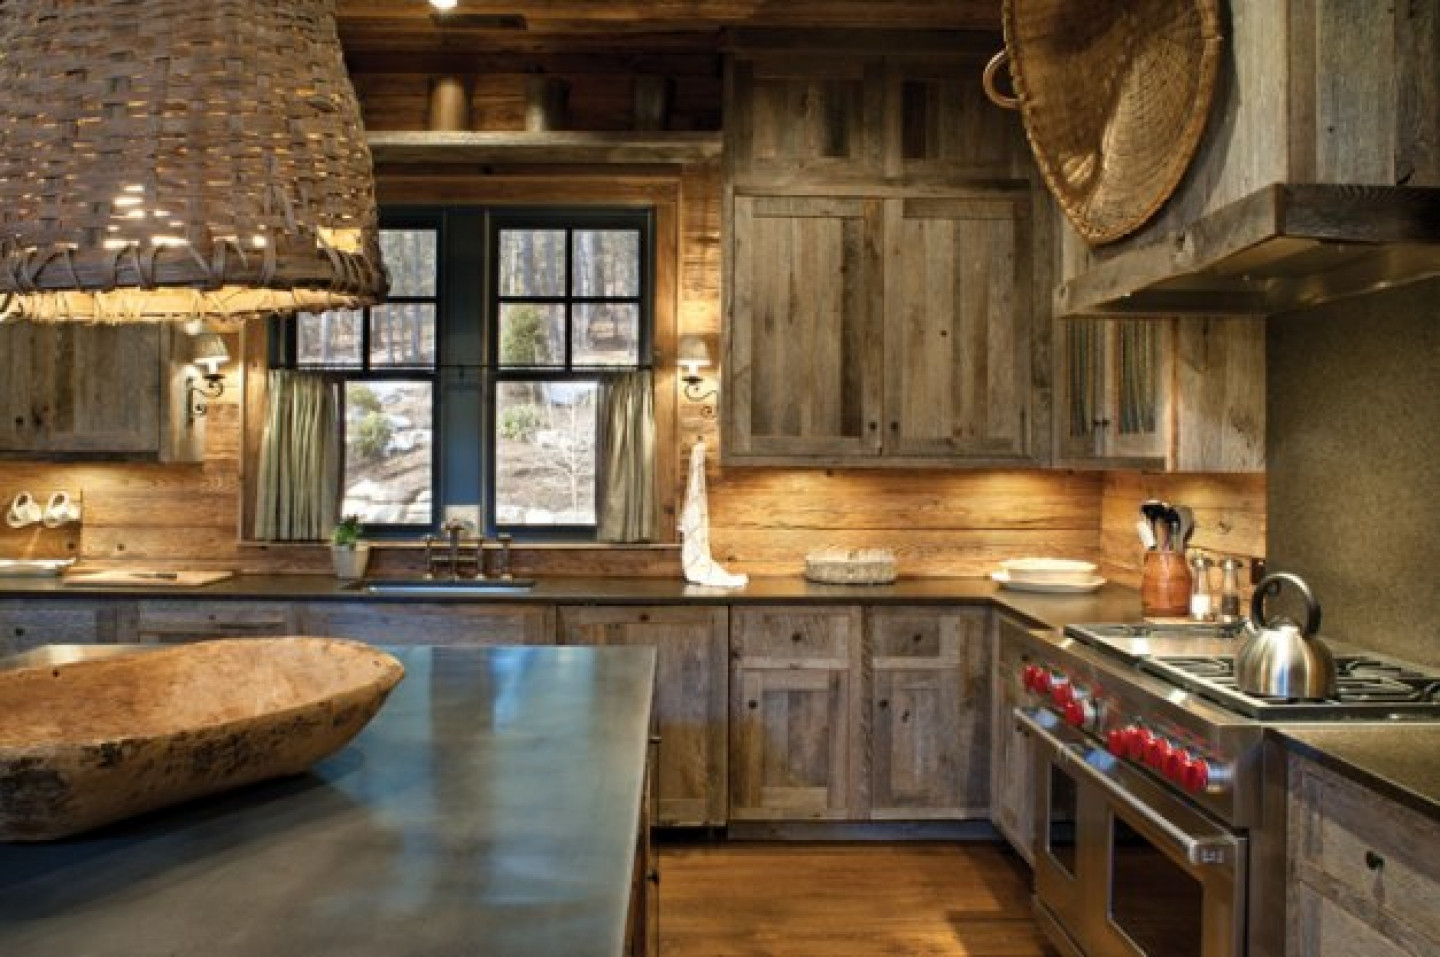 Small Rustic Kitchen Ideas
 40 Rustic Interior Design For Your Home – The WoW Style